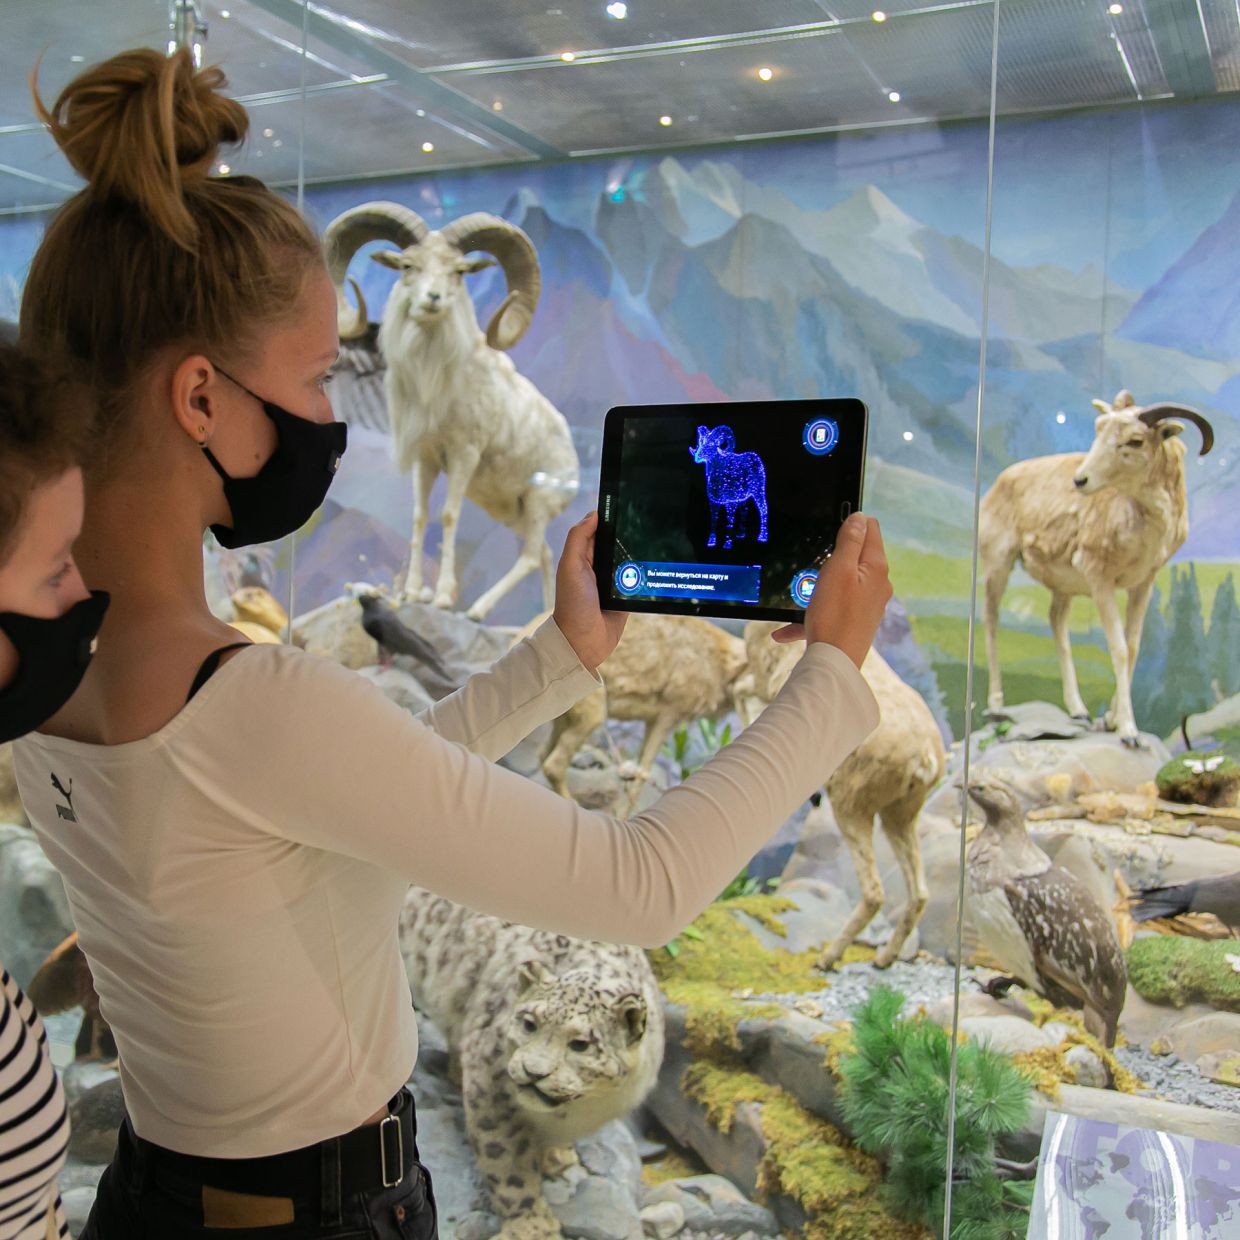 Child holds up tablet in front of an exhibit of a goat